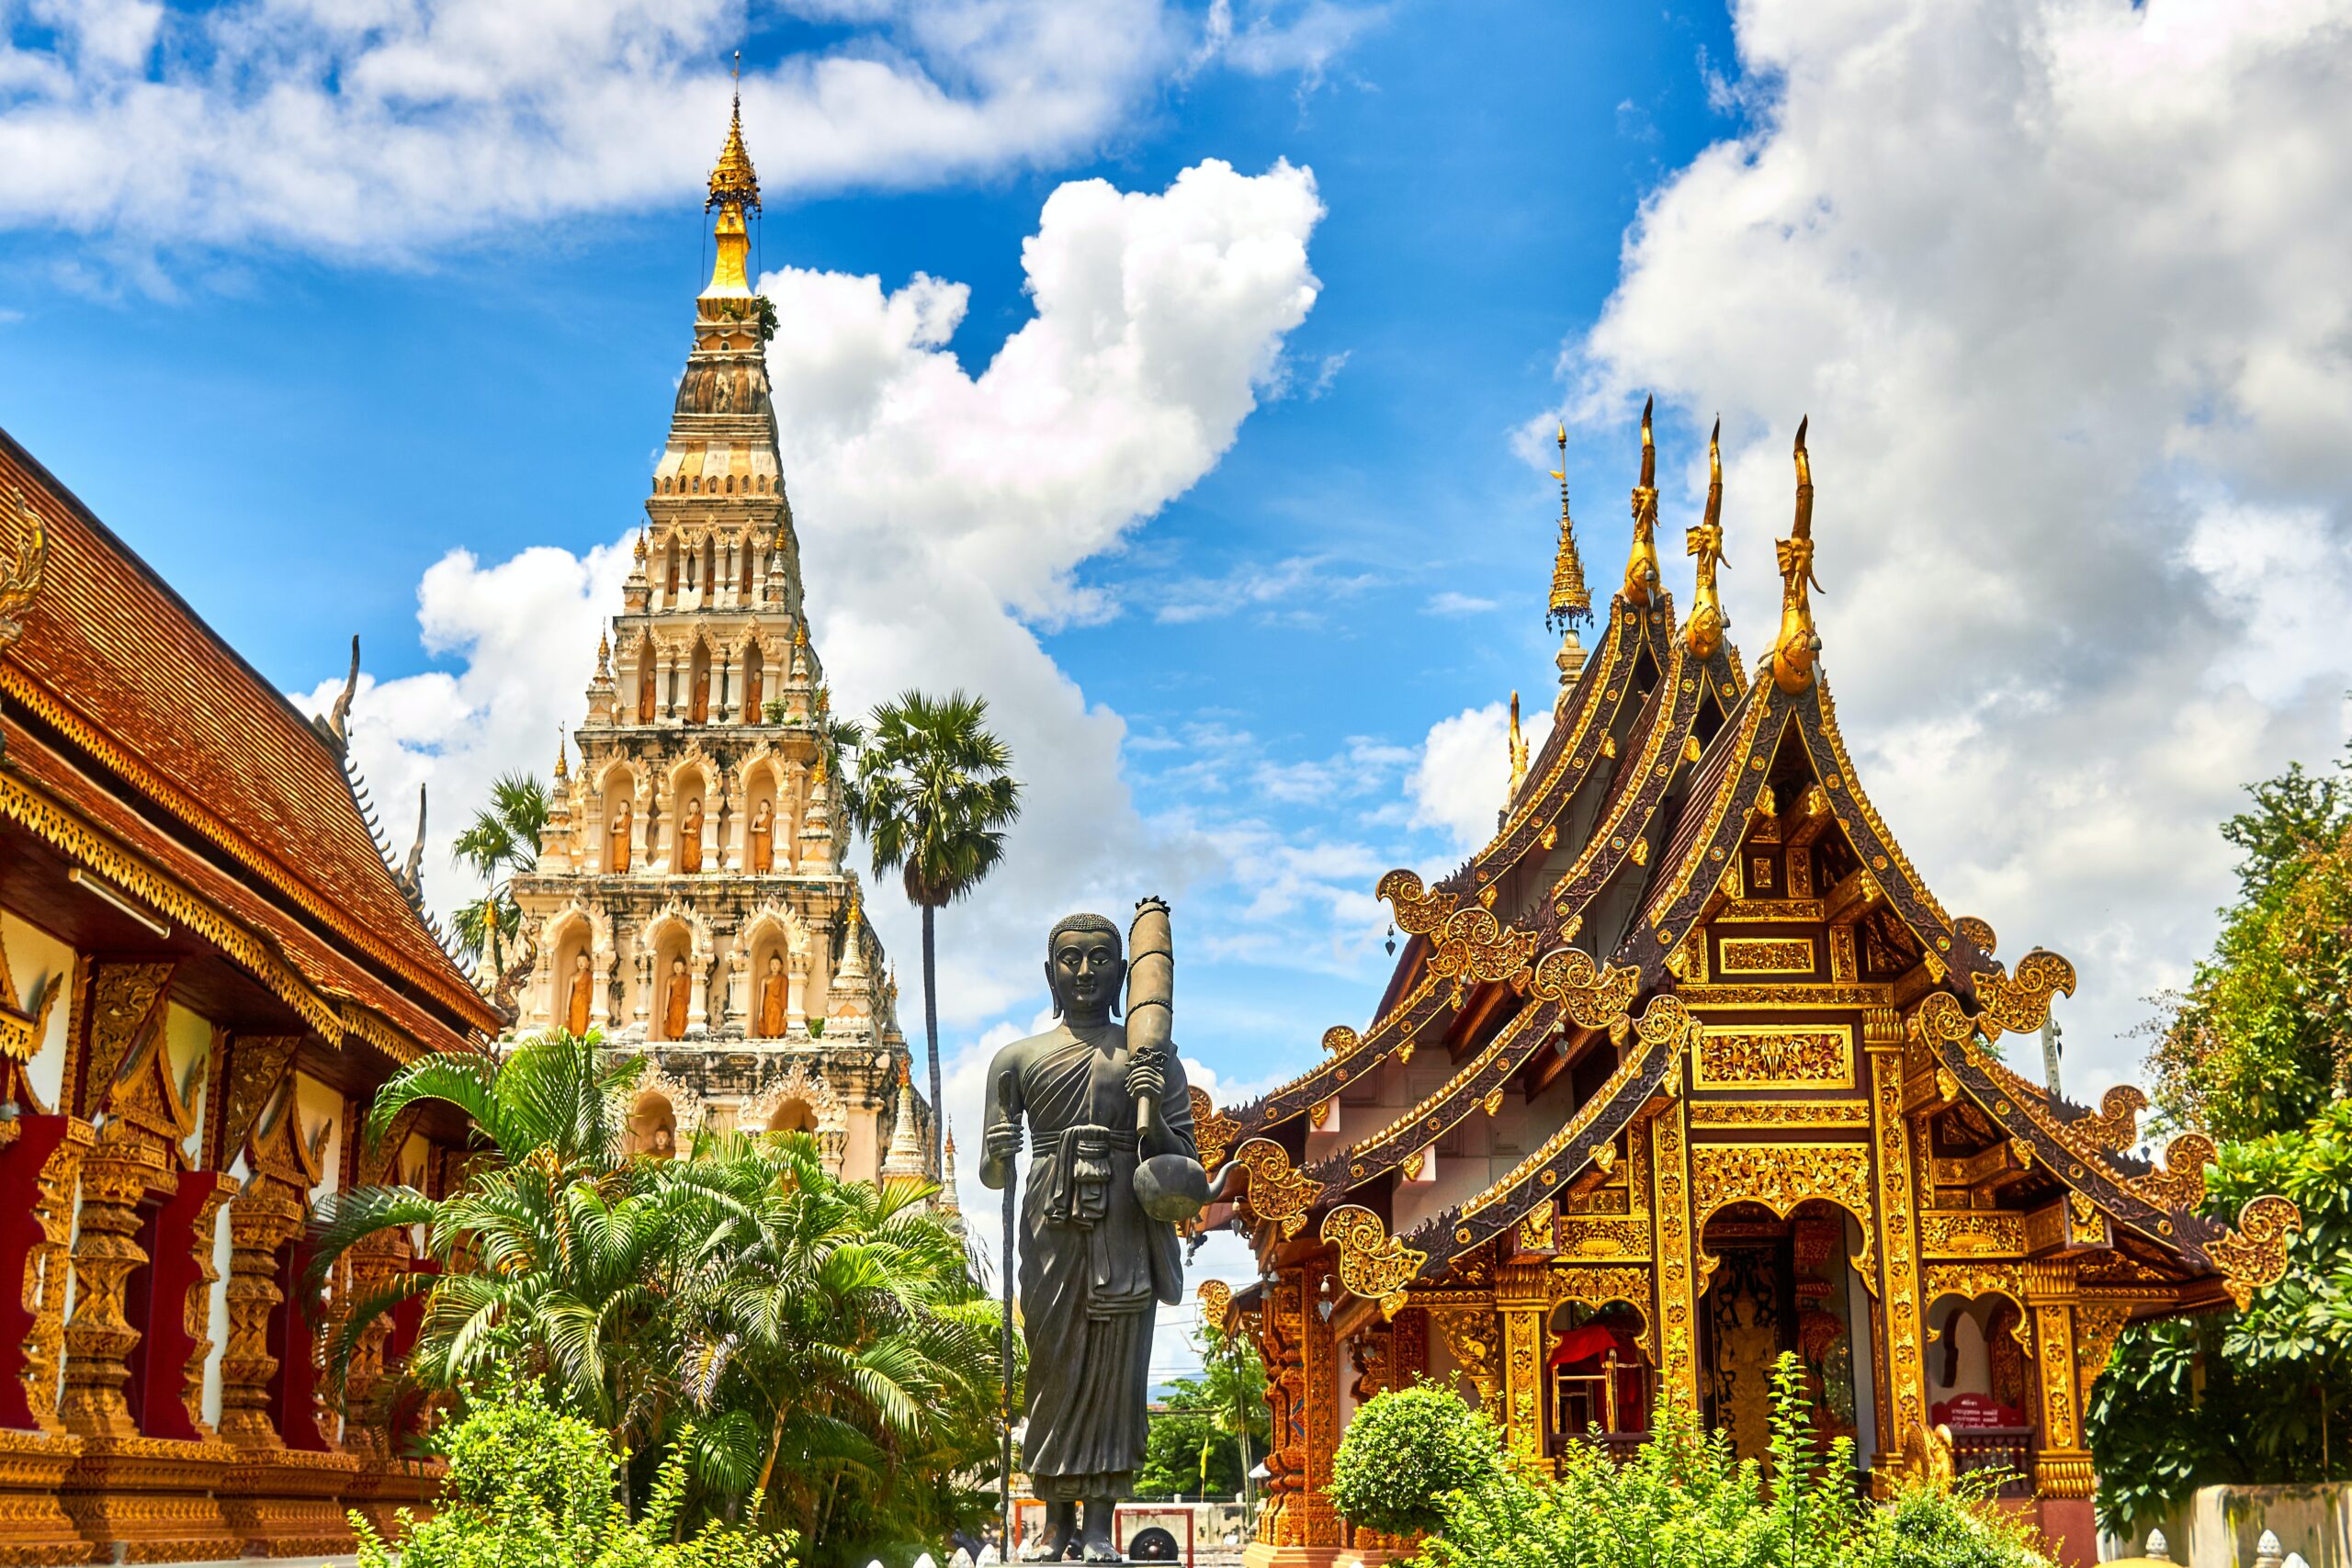 Image of ancient golden temples and a statue in Thailand